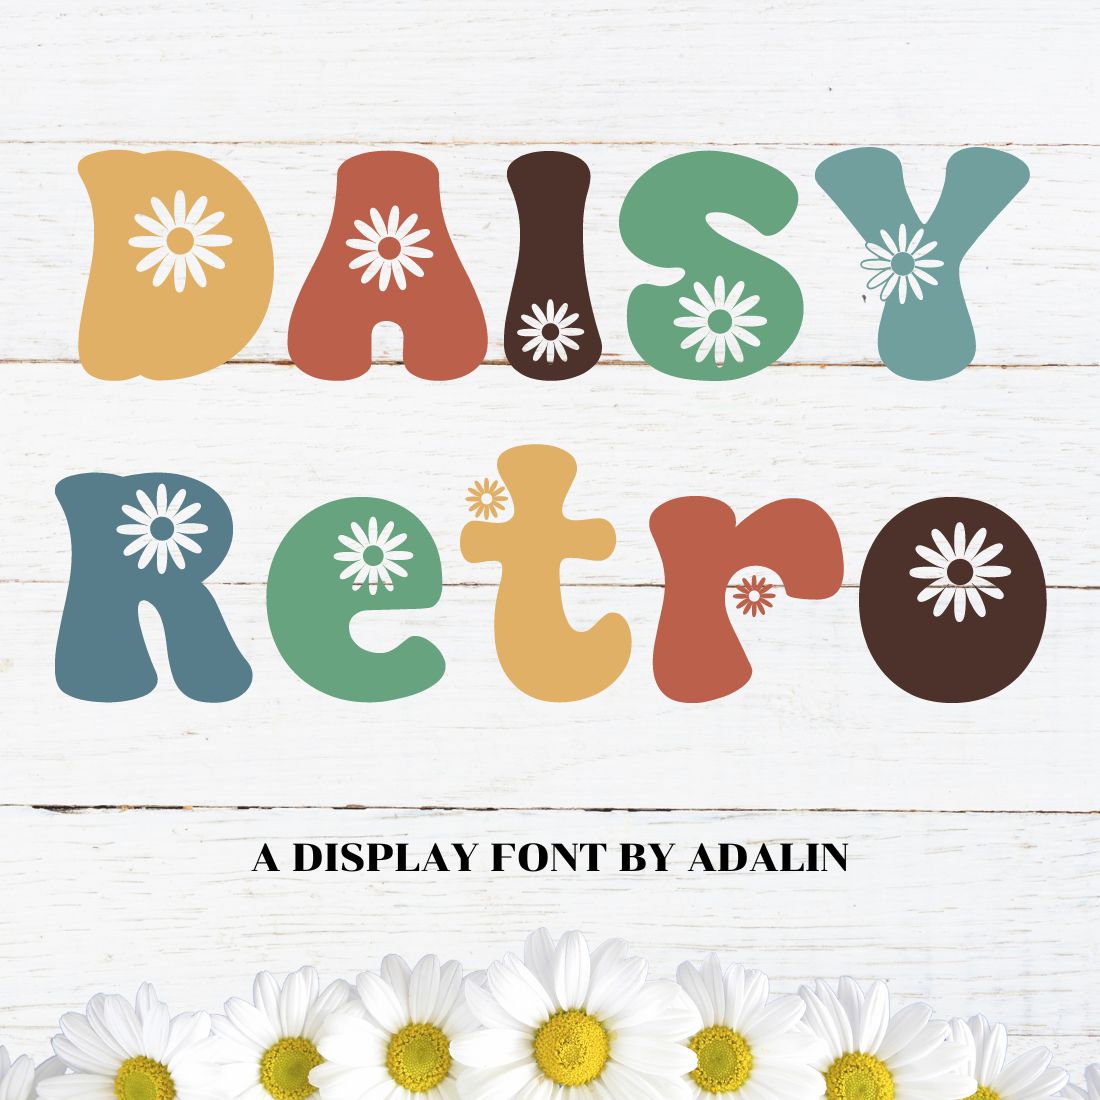 Daisy Retro Font - display font cover image.